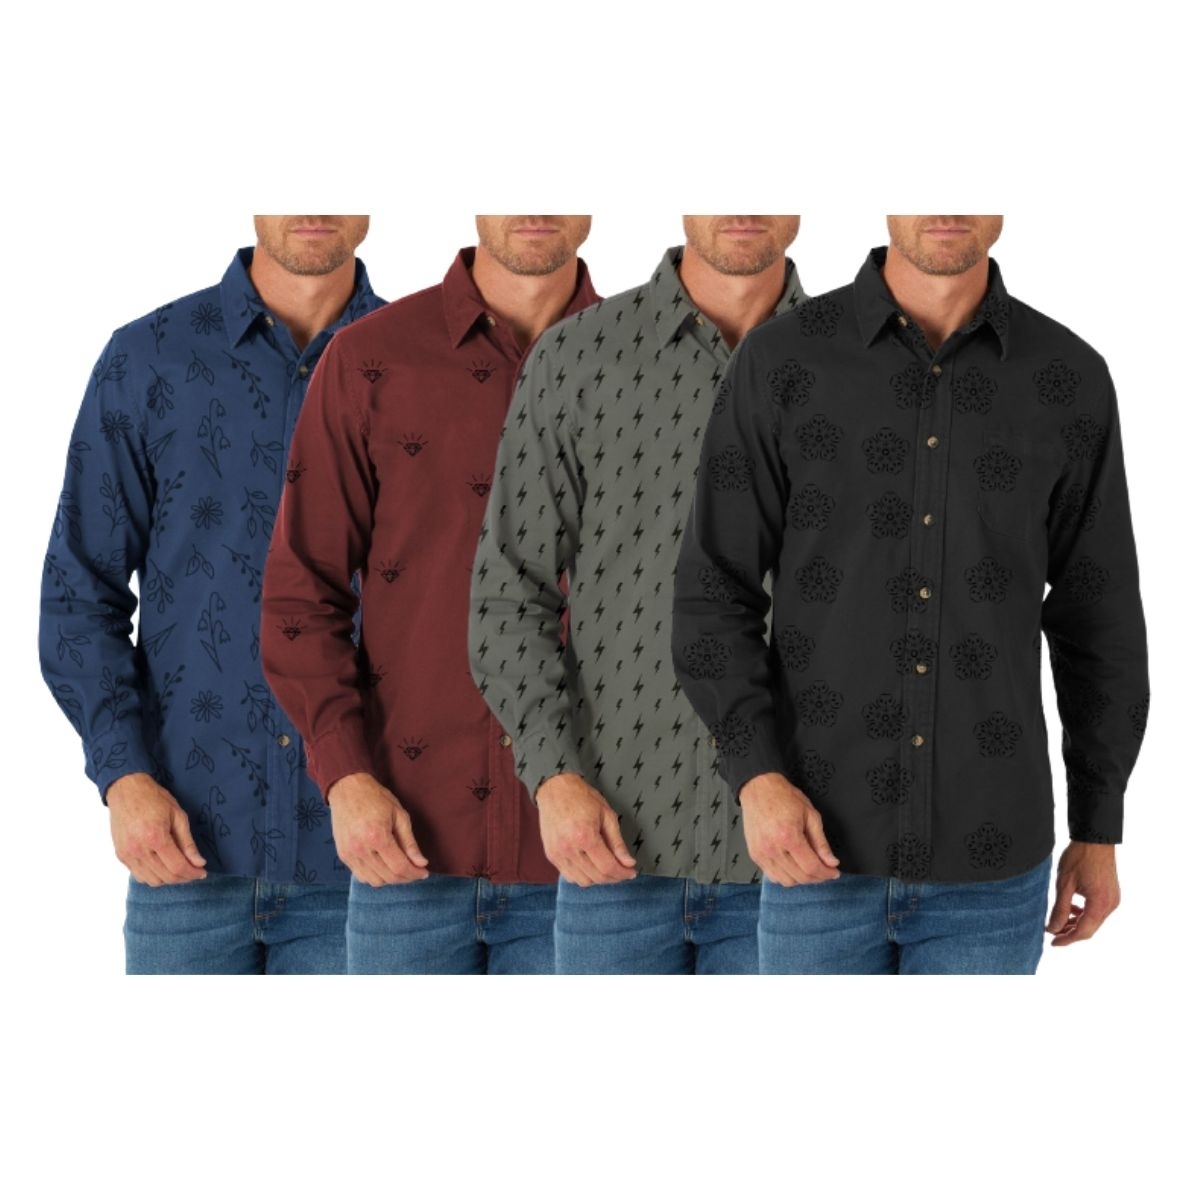 4-Pack: Men's Formal Classic Slim Fit Button Down Long Sleeve Printed Dress Shirt - Xx-large